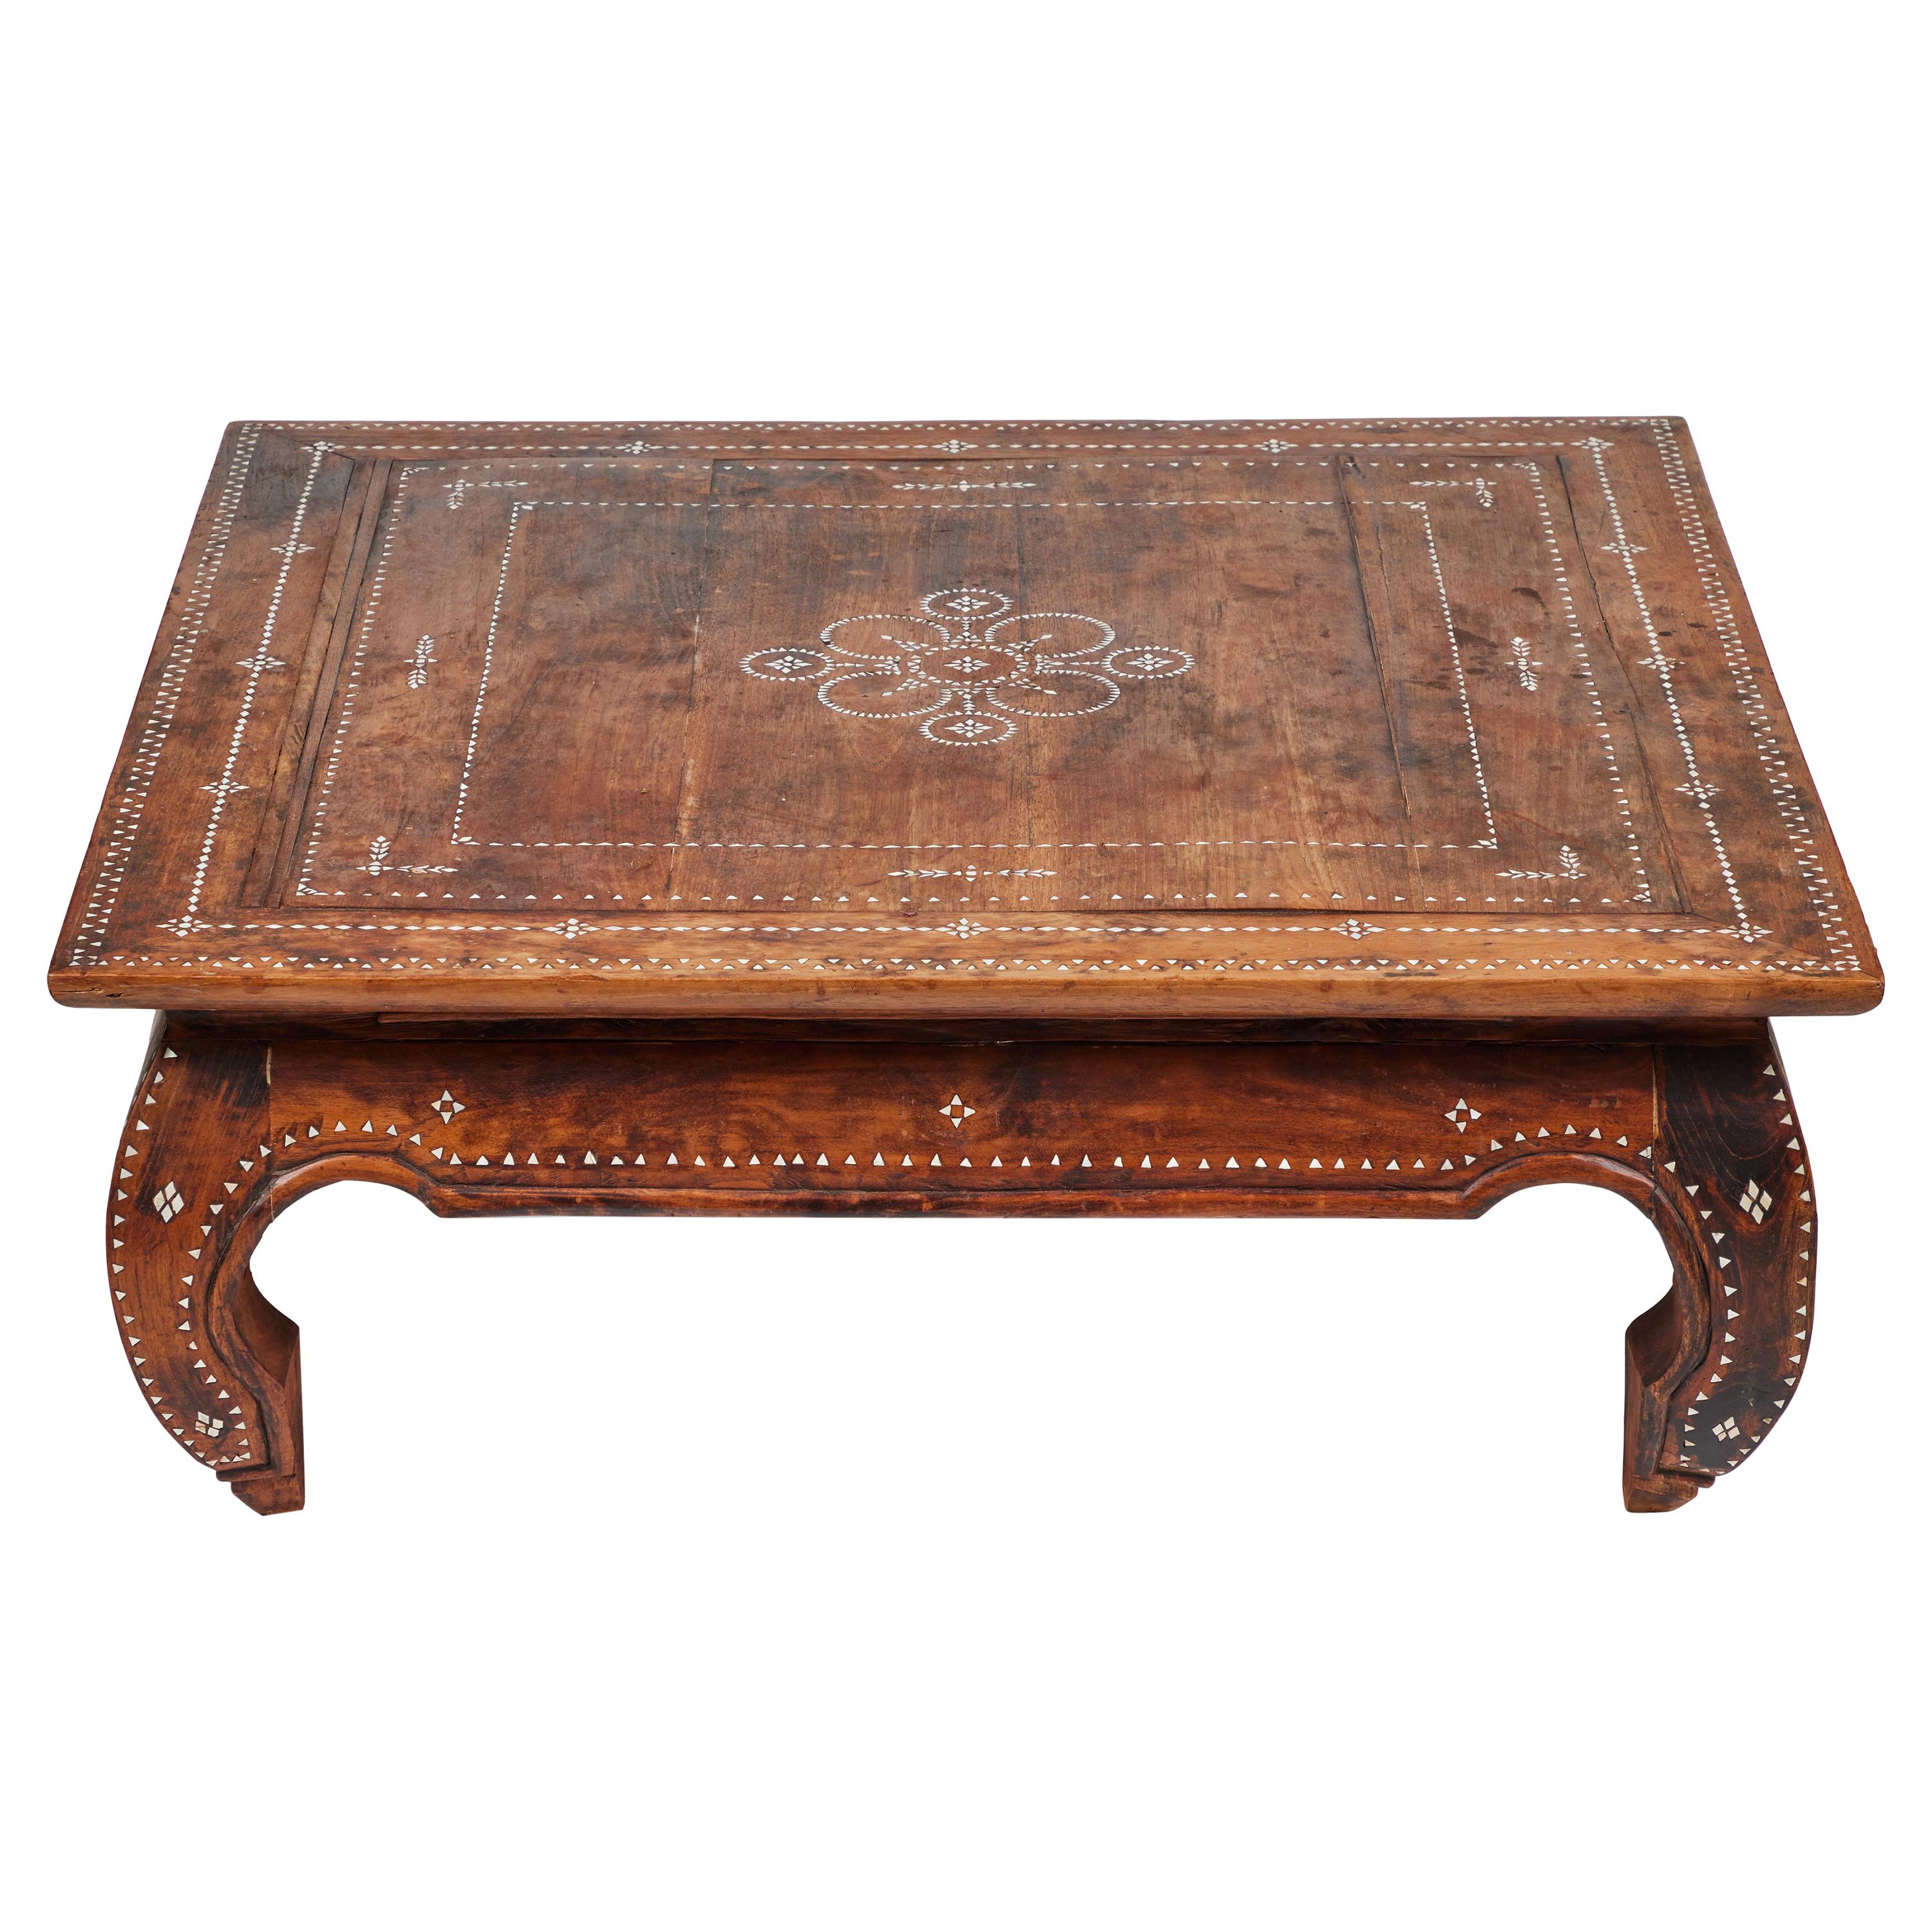 Large Vintage Hand-Carved Inlaid Square Wood Coffee Table 